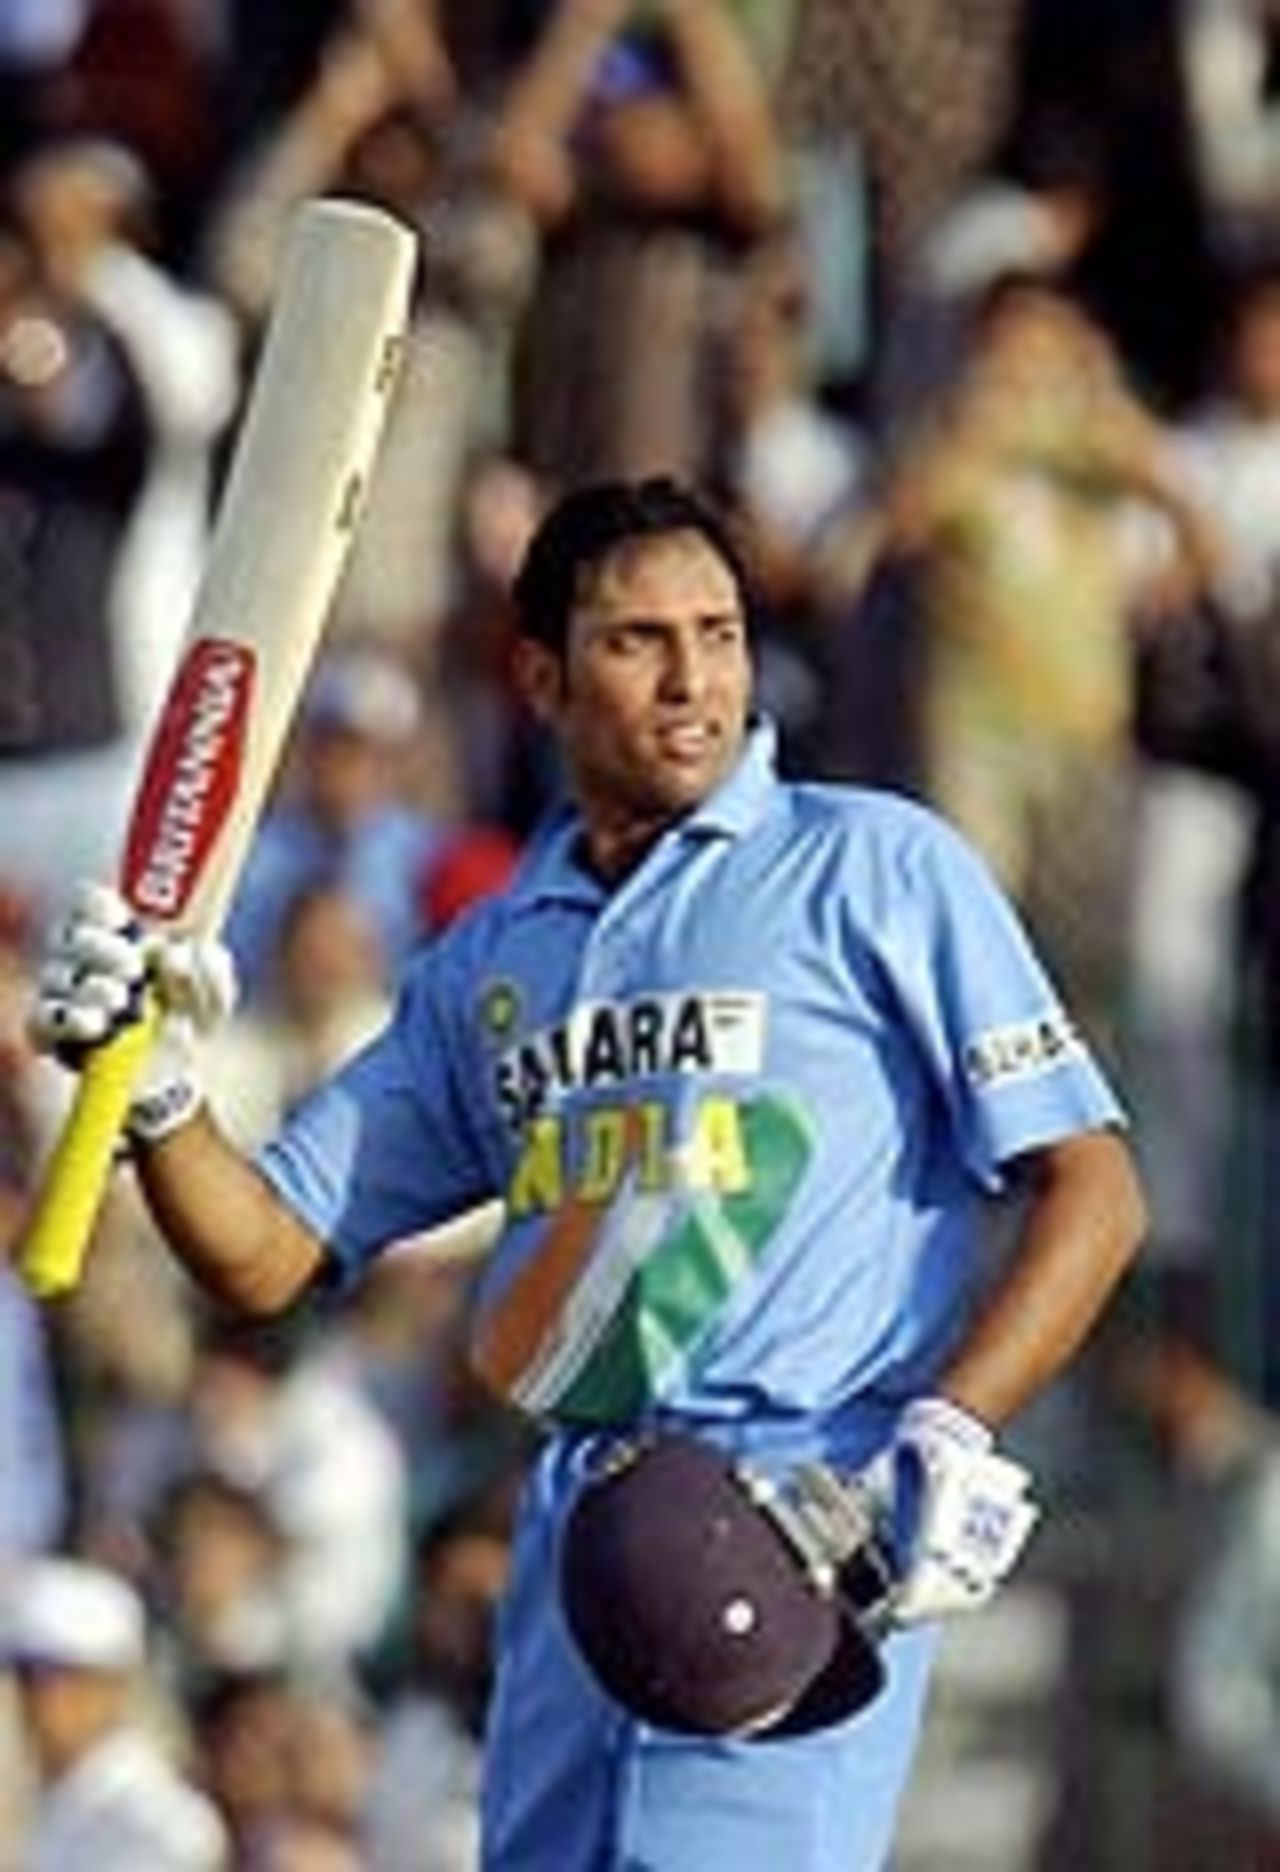 VVS Laxman acknowledges the applause after reaching his century, Pakistan v India, 5th ODI, Lahore, March 24, 2004